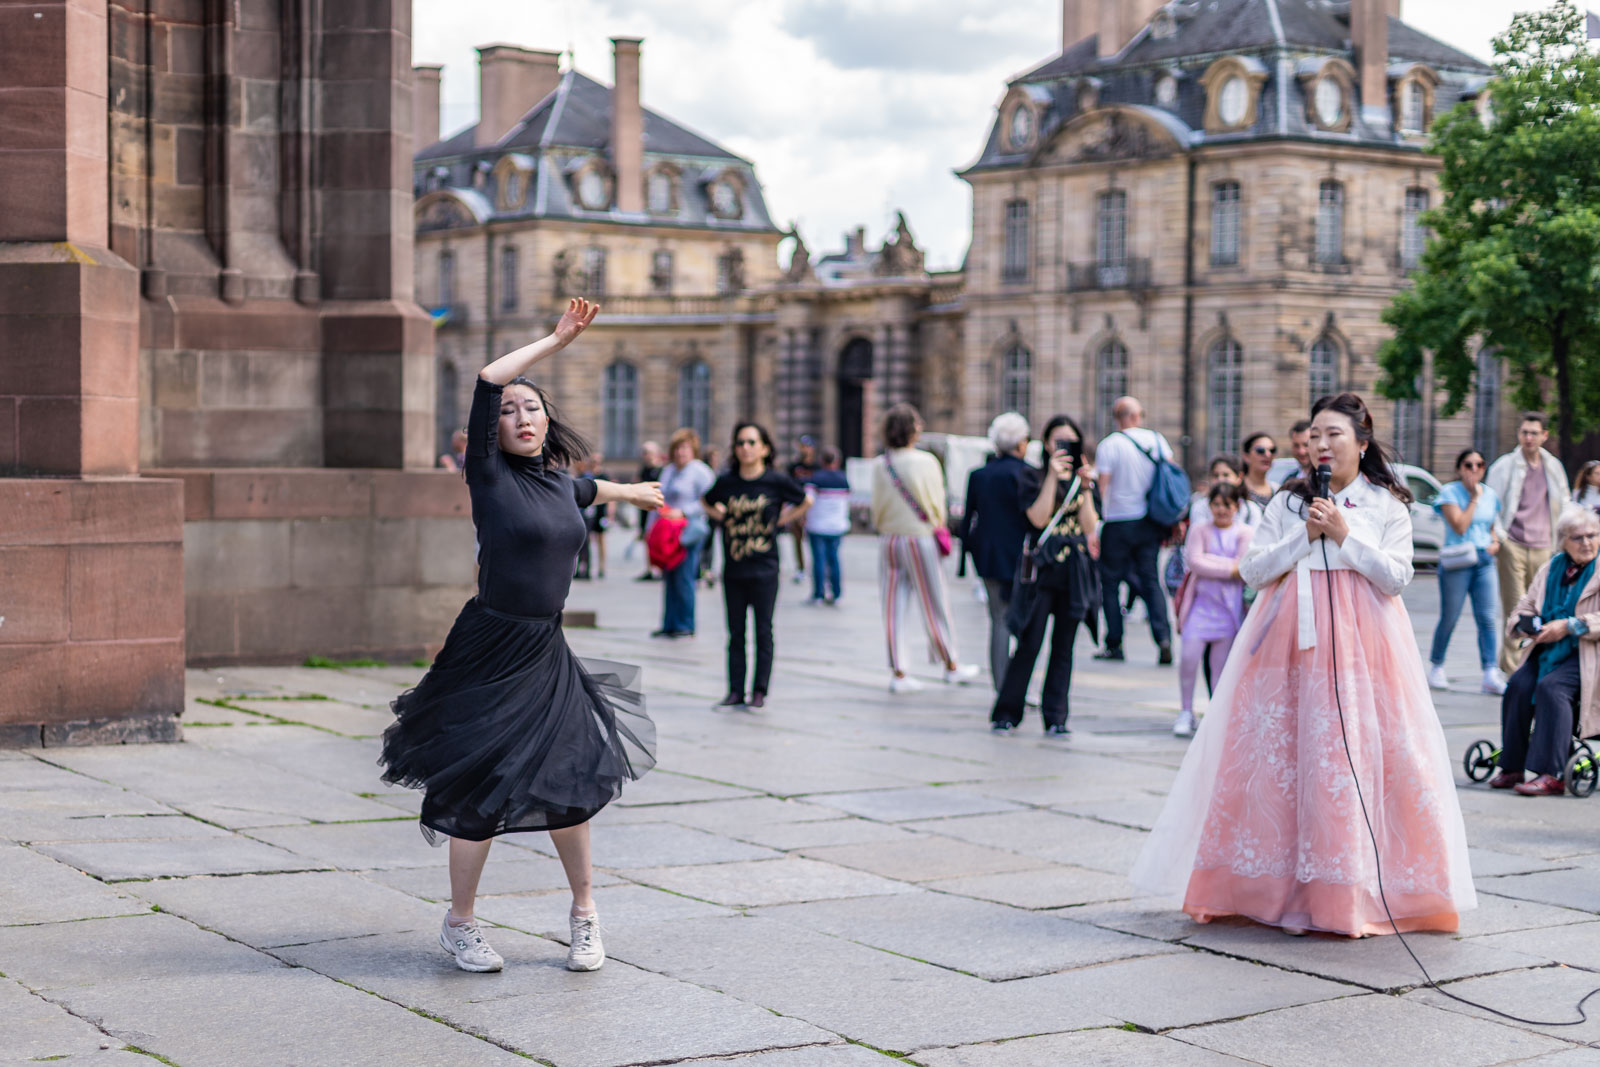 Becoming a mother - Korean dancer and her mother performing in Strasbourg